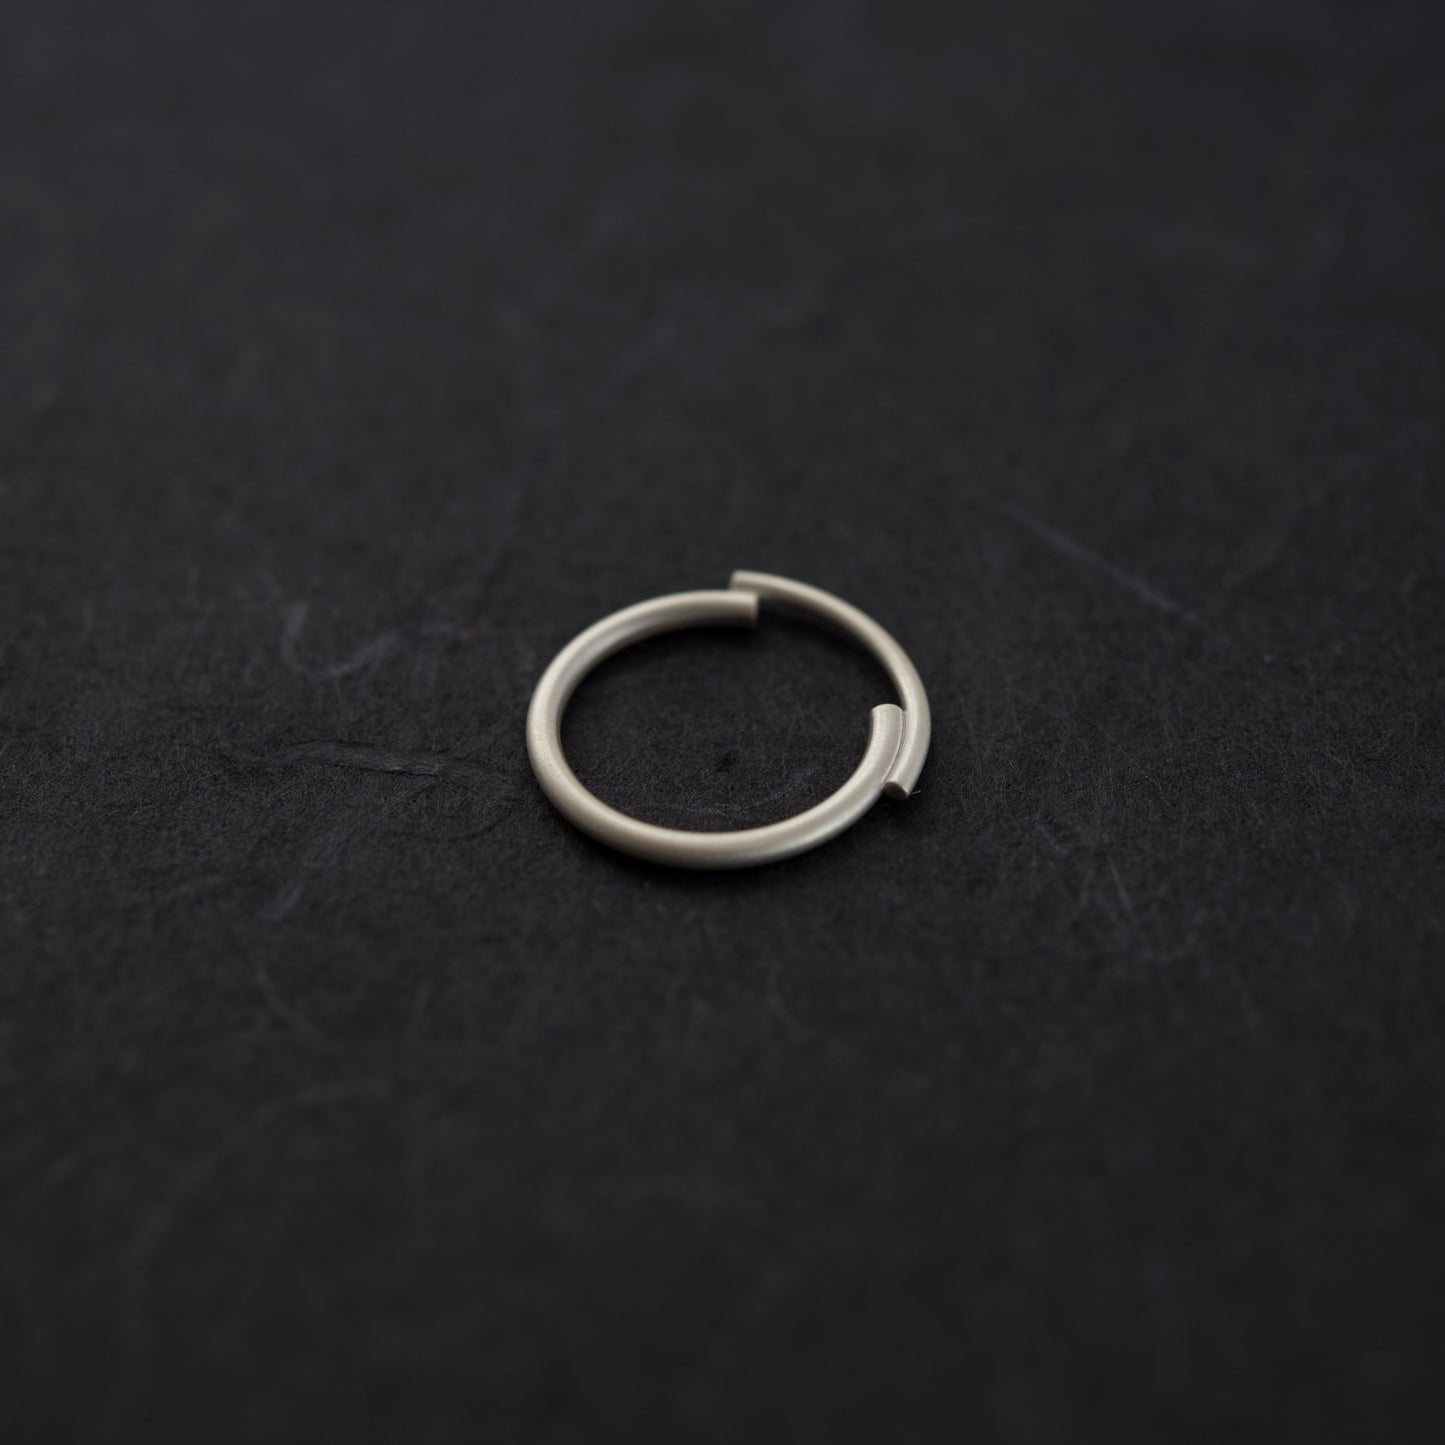 Architectural silver ring N°3